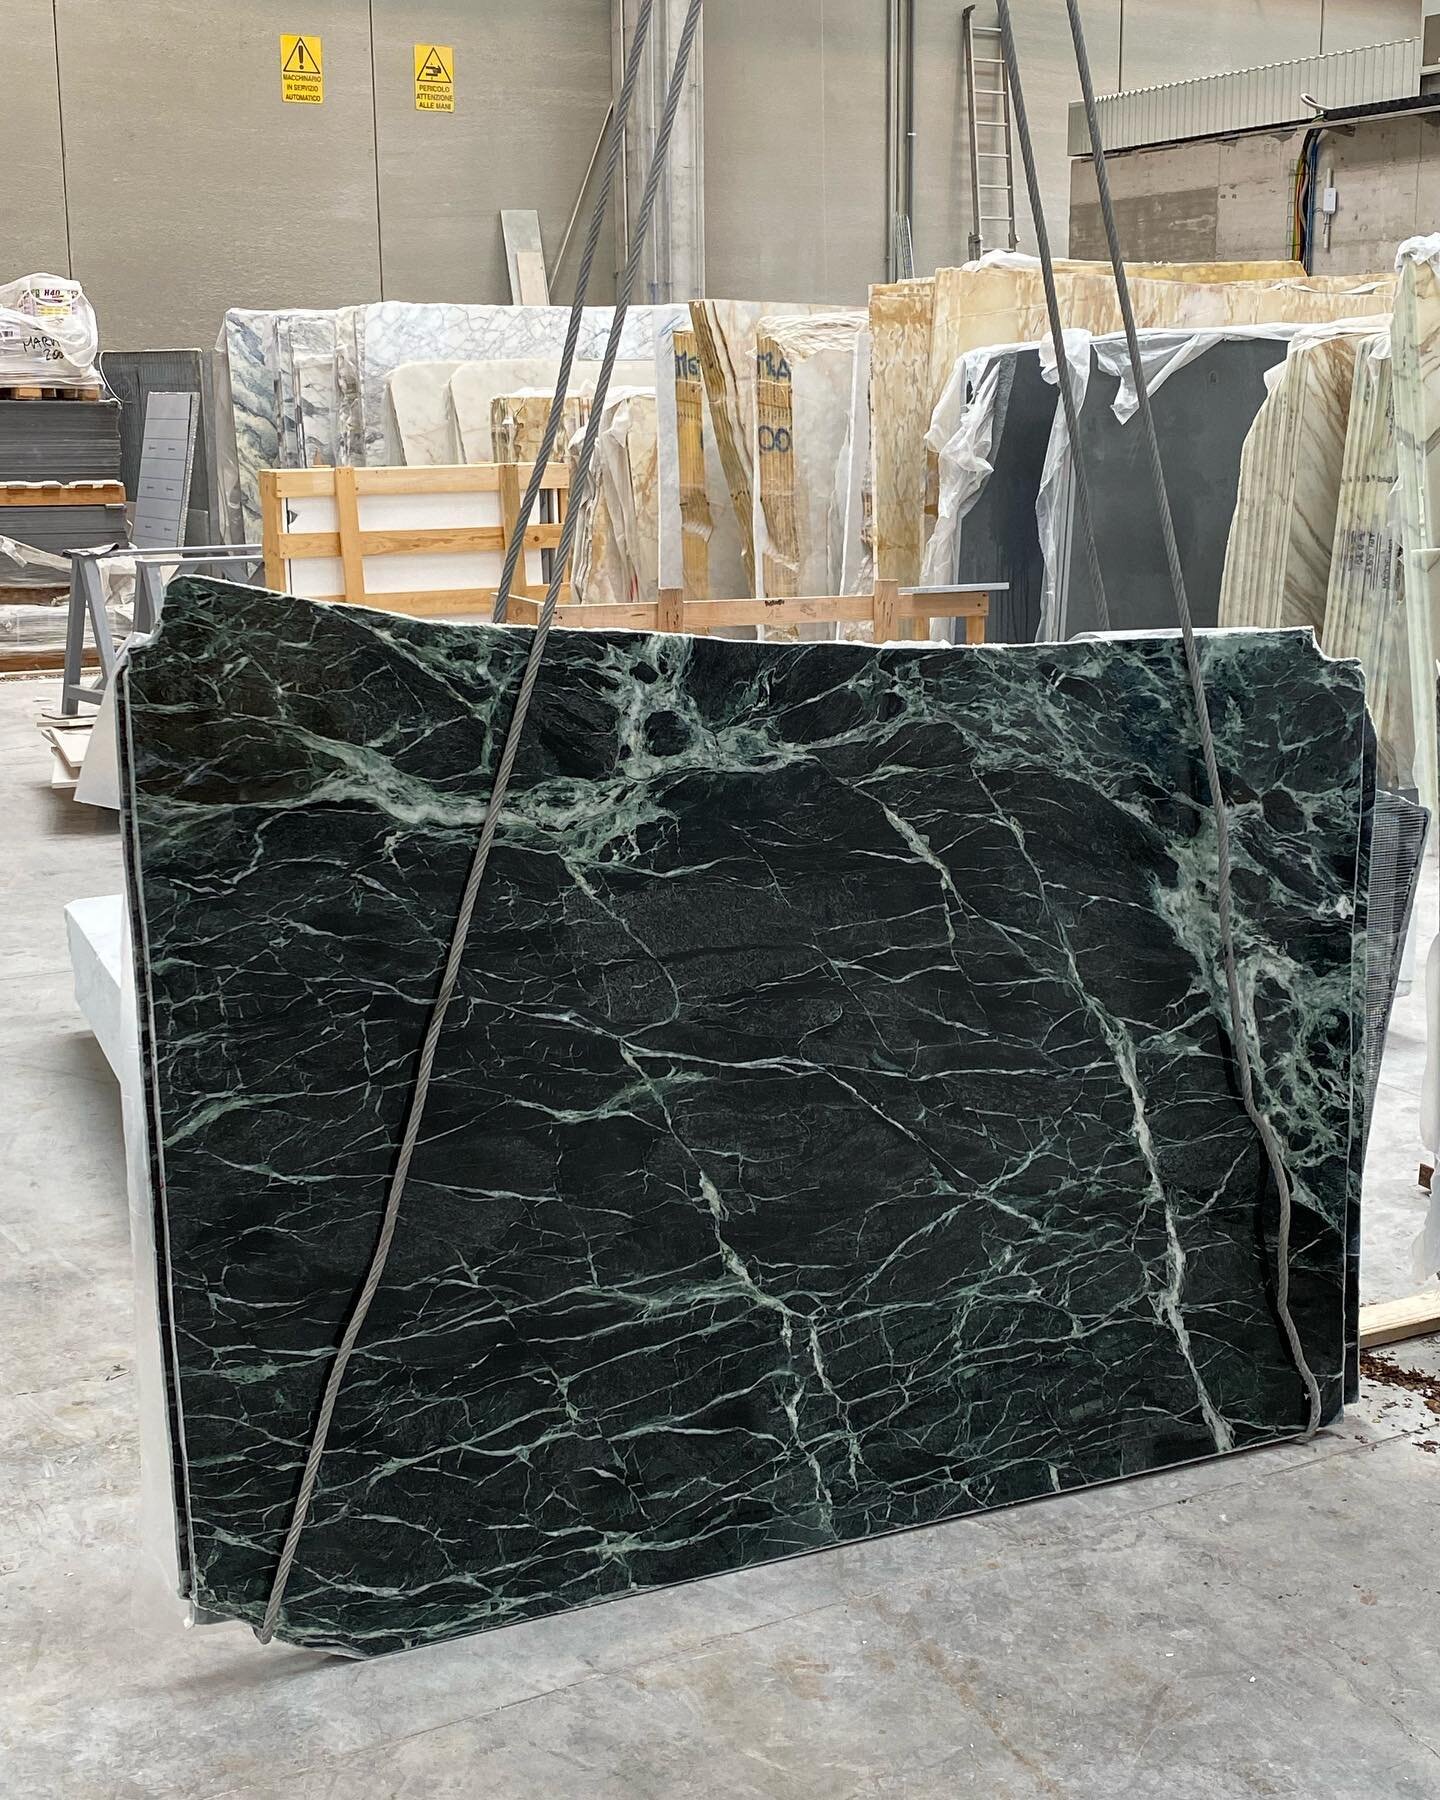 Our latest custom project is this coffee table in polished Verde Alpi with chamfered edges and subtle rounded corners - all packed up and ready to ship.

Interested in creating your own marble design? Learn more about our custom projects on our websi